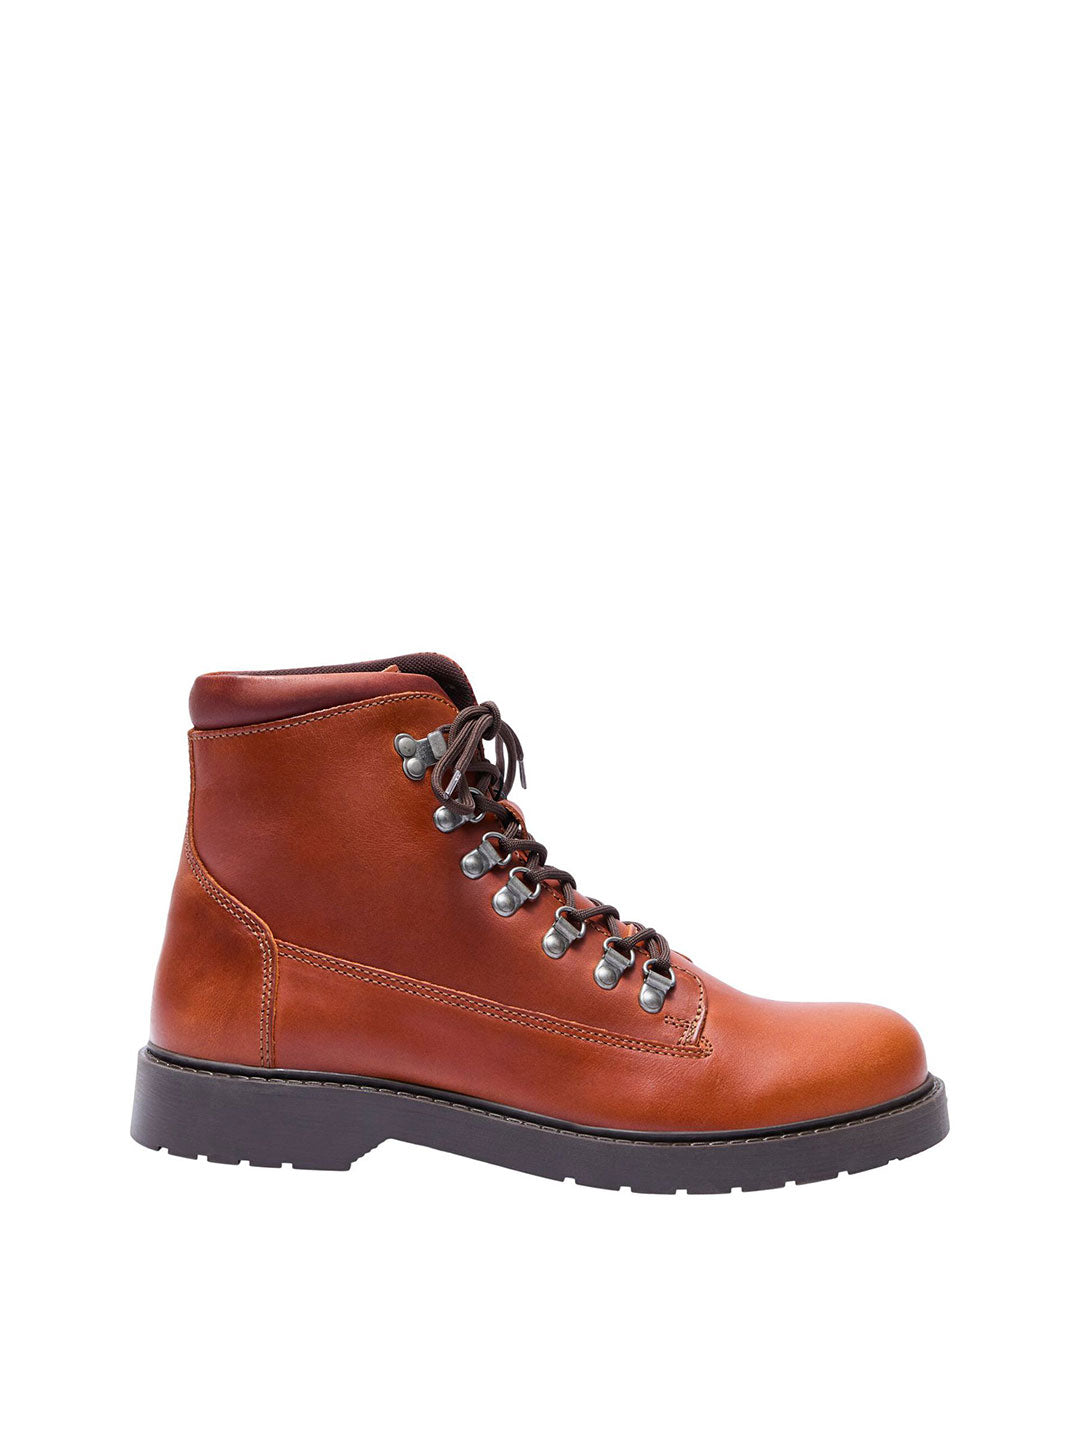 Selected Leather combat boots